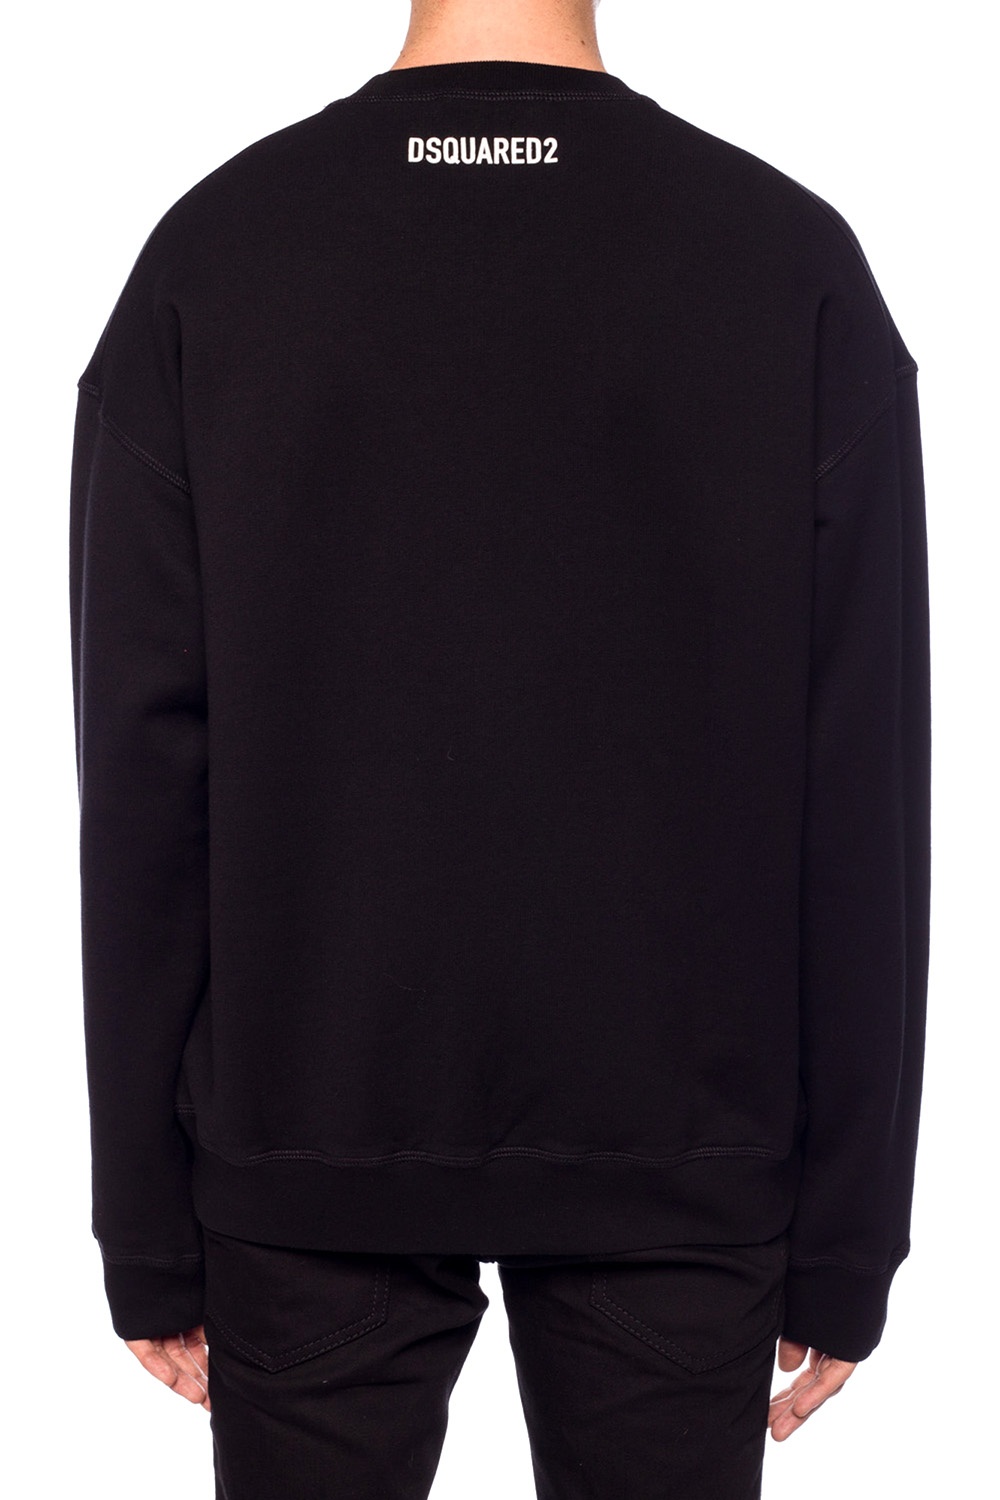 Dsquared2 'Exclusive for SneakersbeShops' limited collection sweatshirt